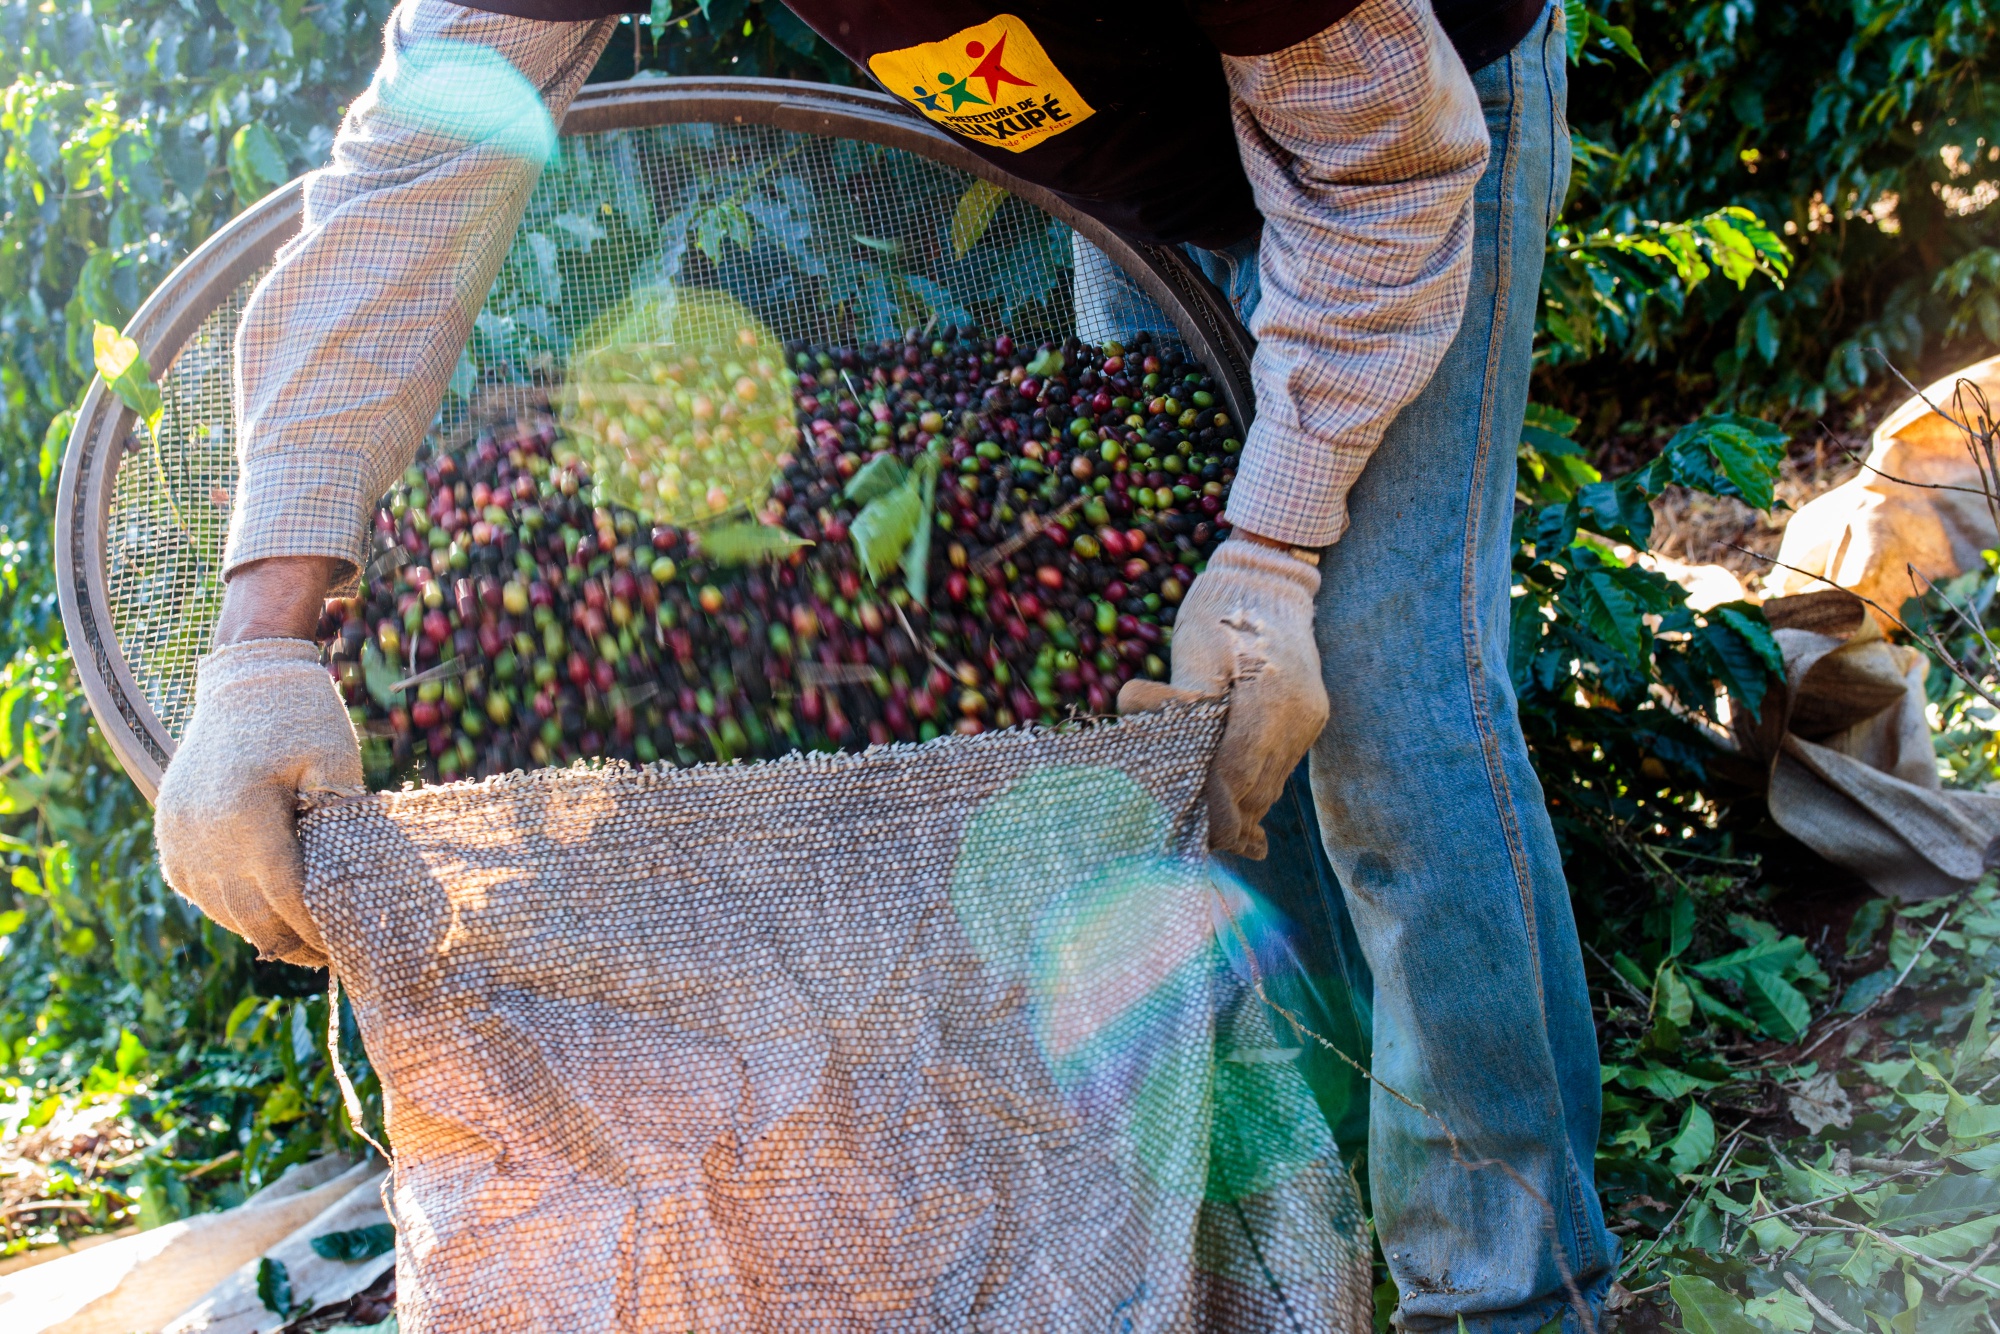 A worker bags coffee cherries during harvest in Minas Gerais state, Brazil.